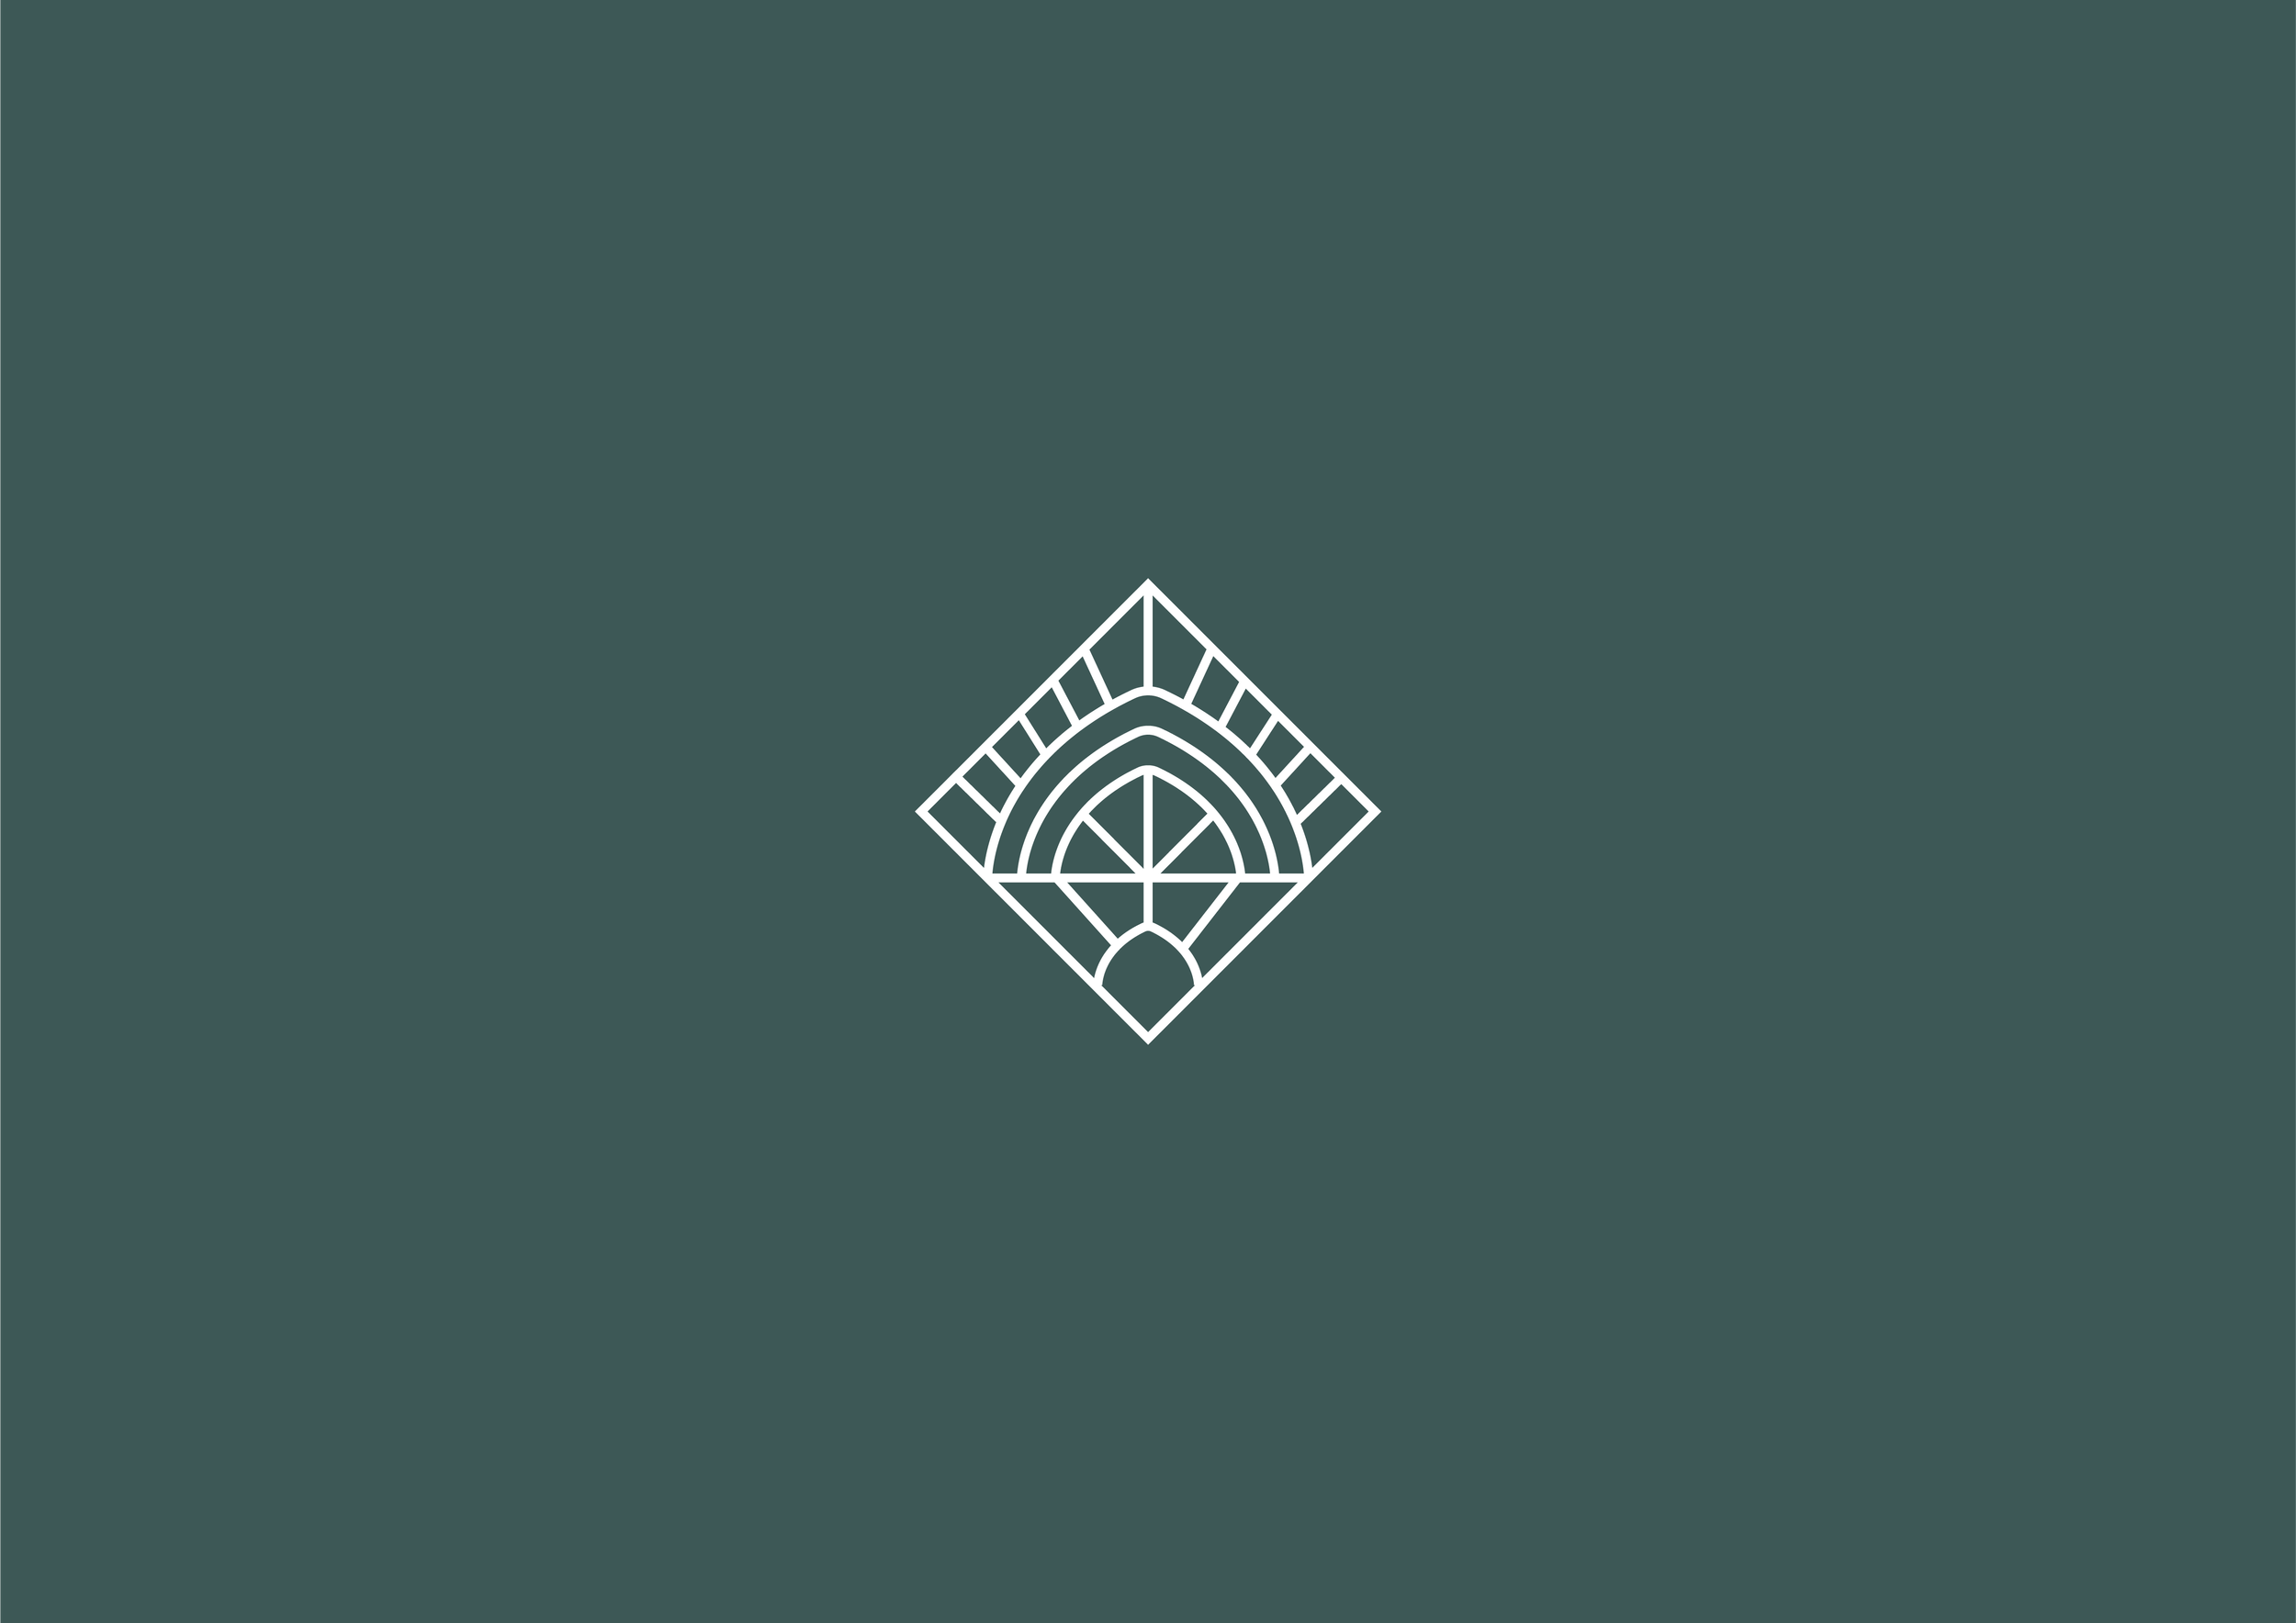 Simple geometric icon design for a Yorkshire based perfume company